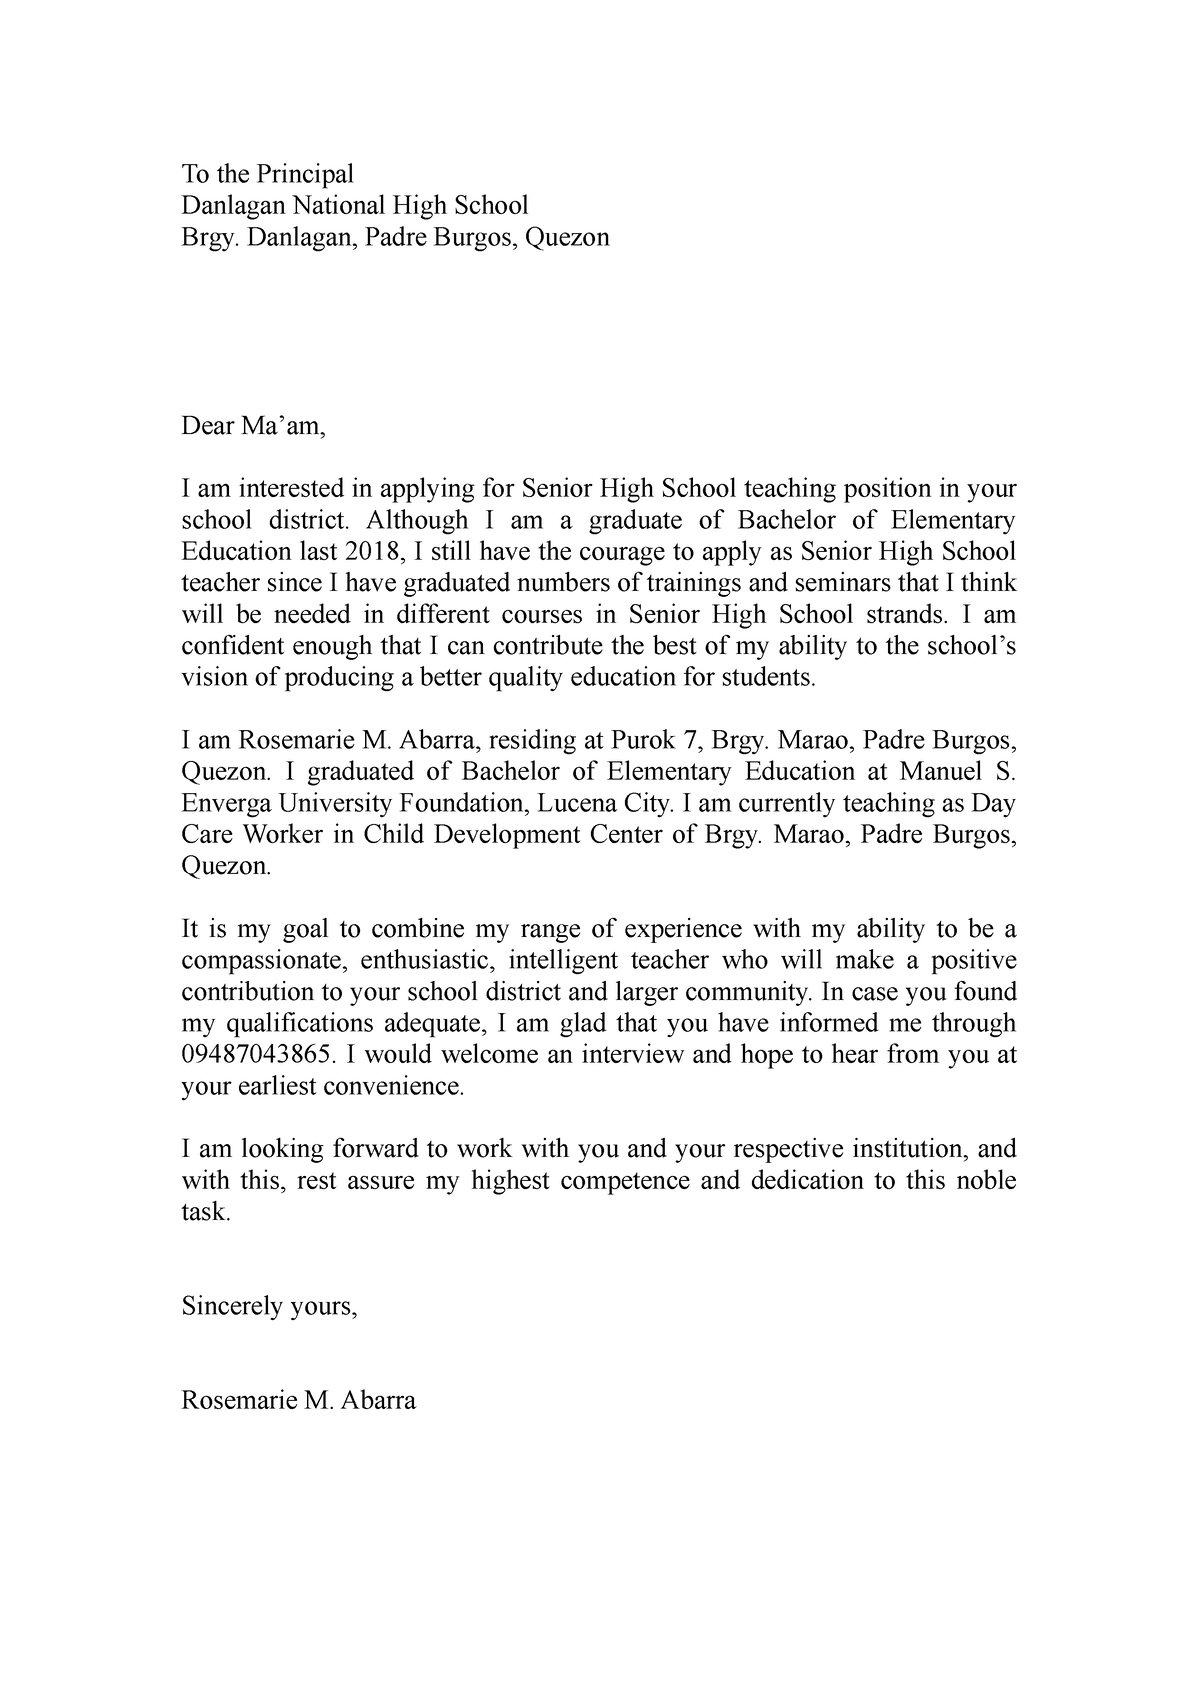 Letter of Intent - None - To the Principal Danlagan National High ...